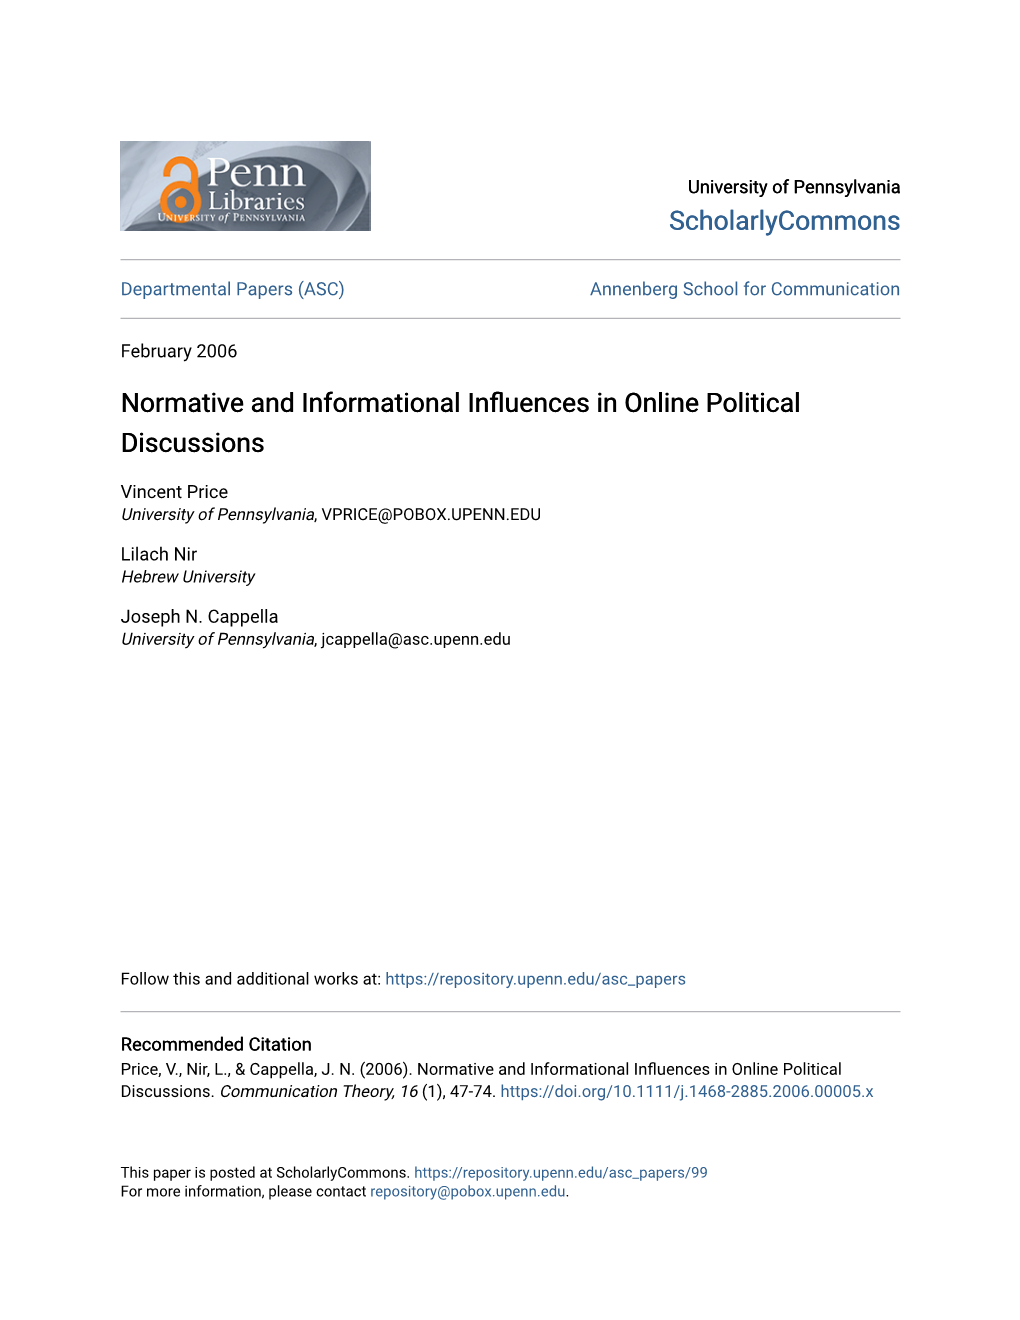 Normative and Informational Influences in Online Political